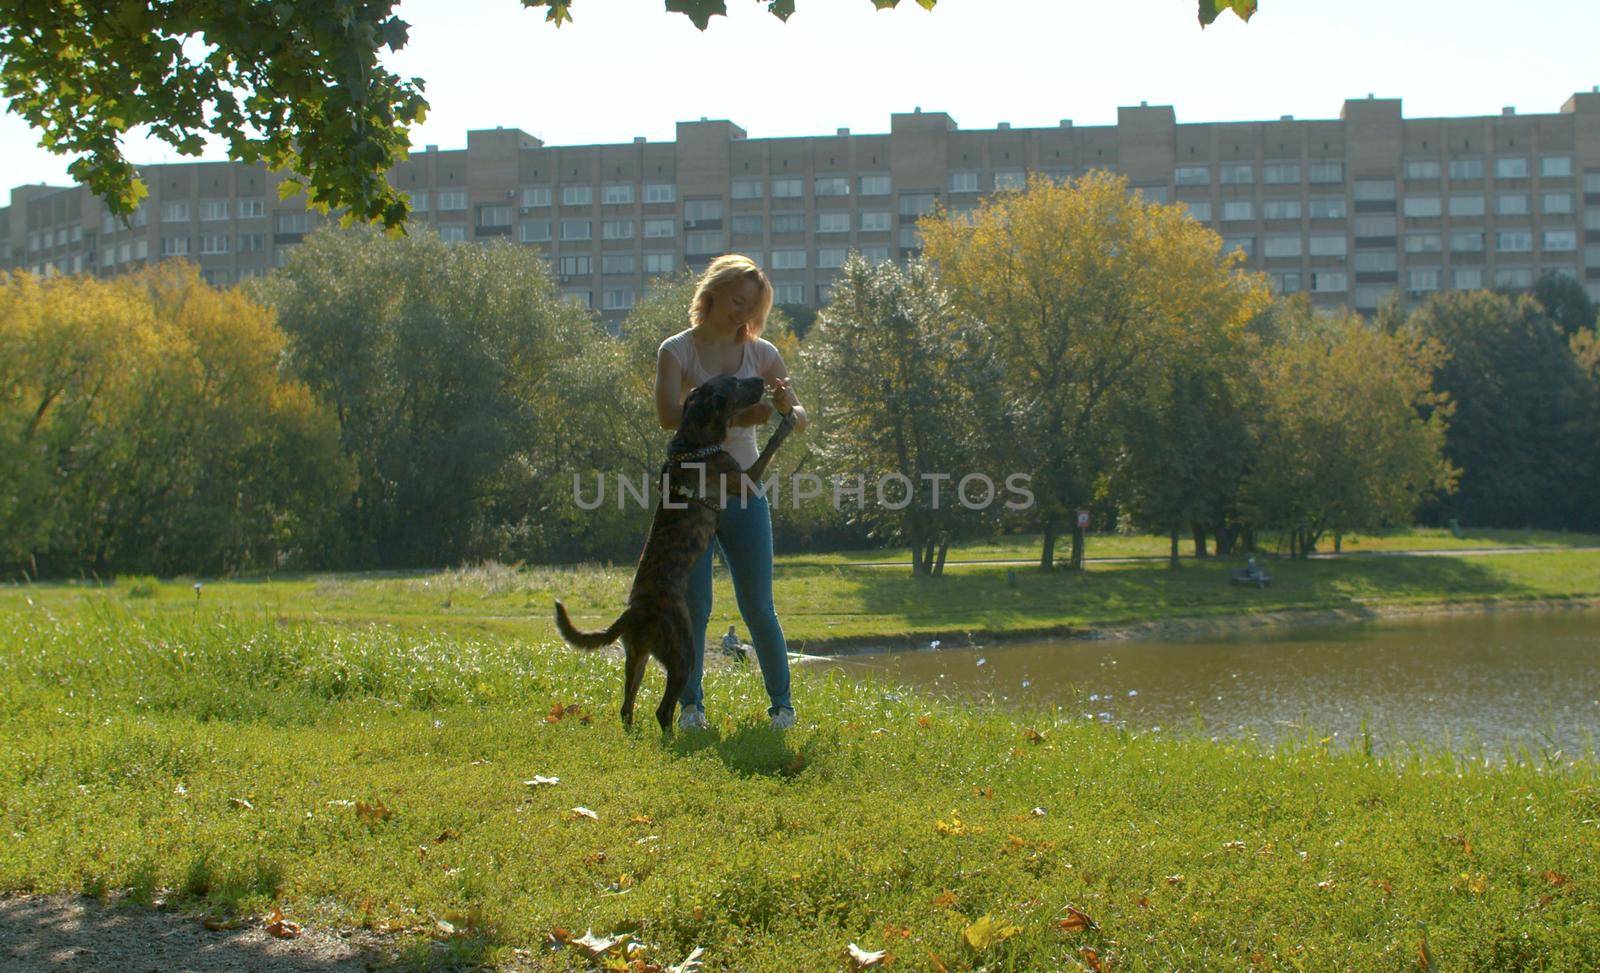 Young woman playing with the dog in the park. Dog standing on its hind legs.